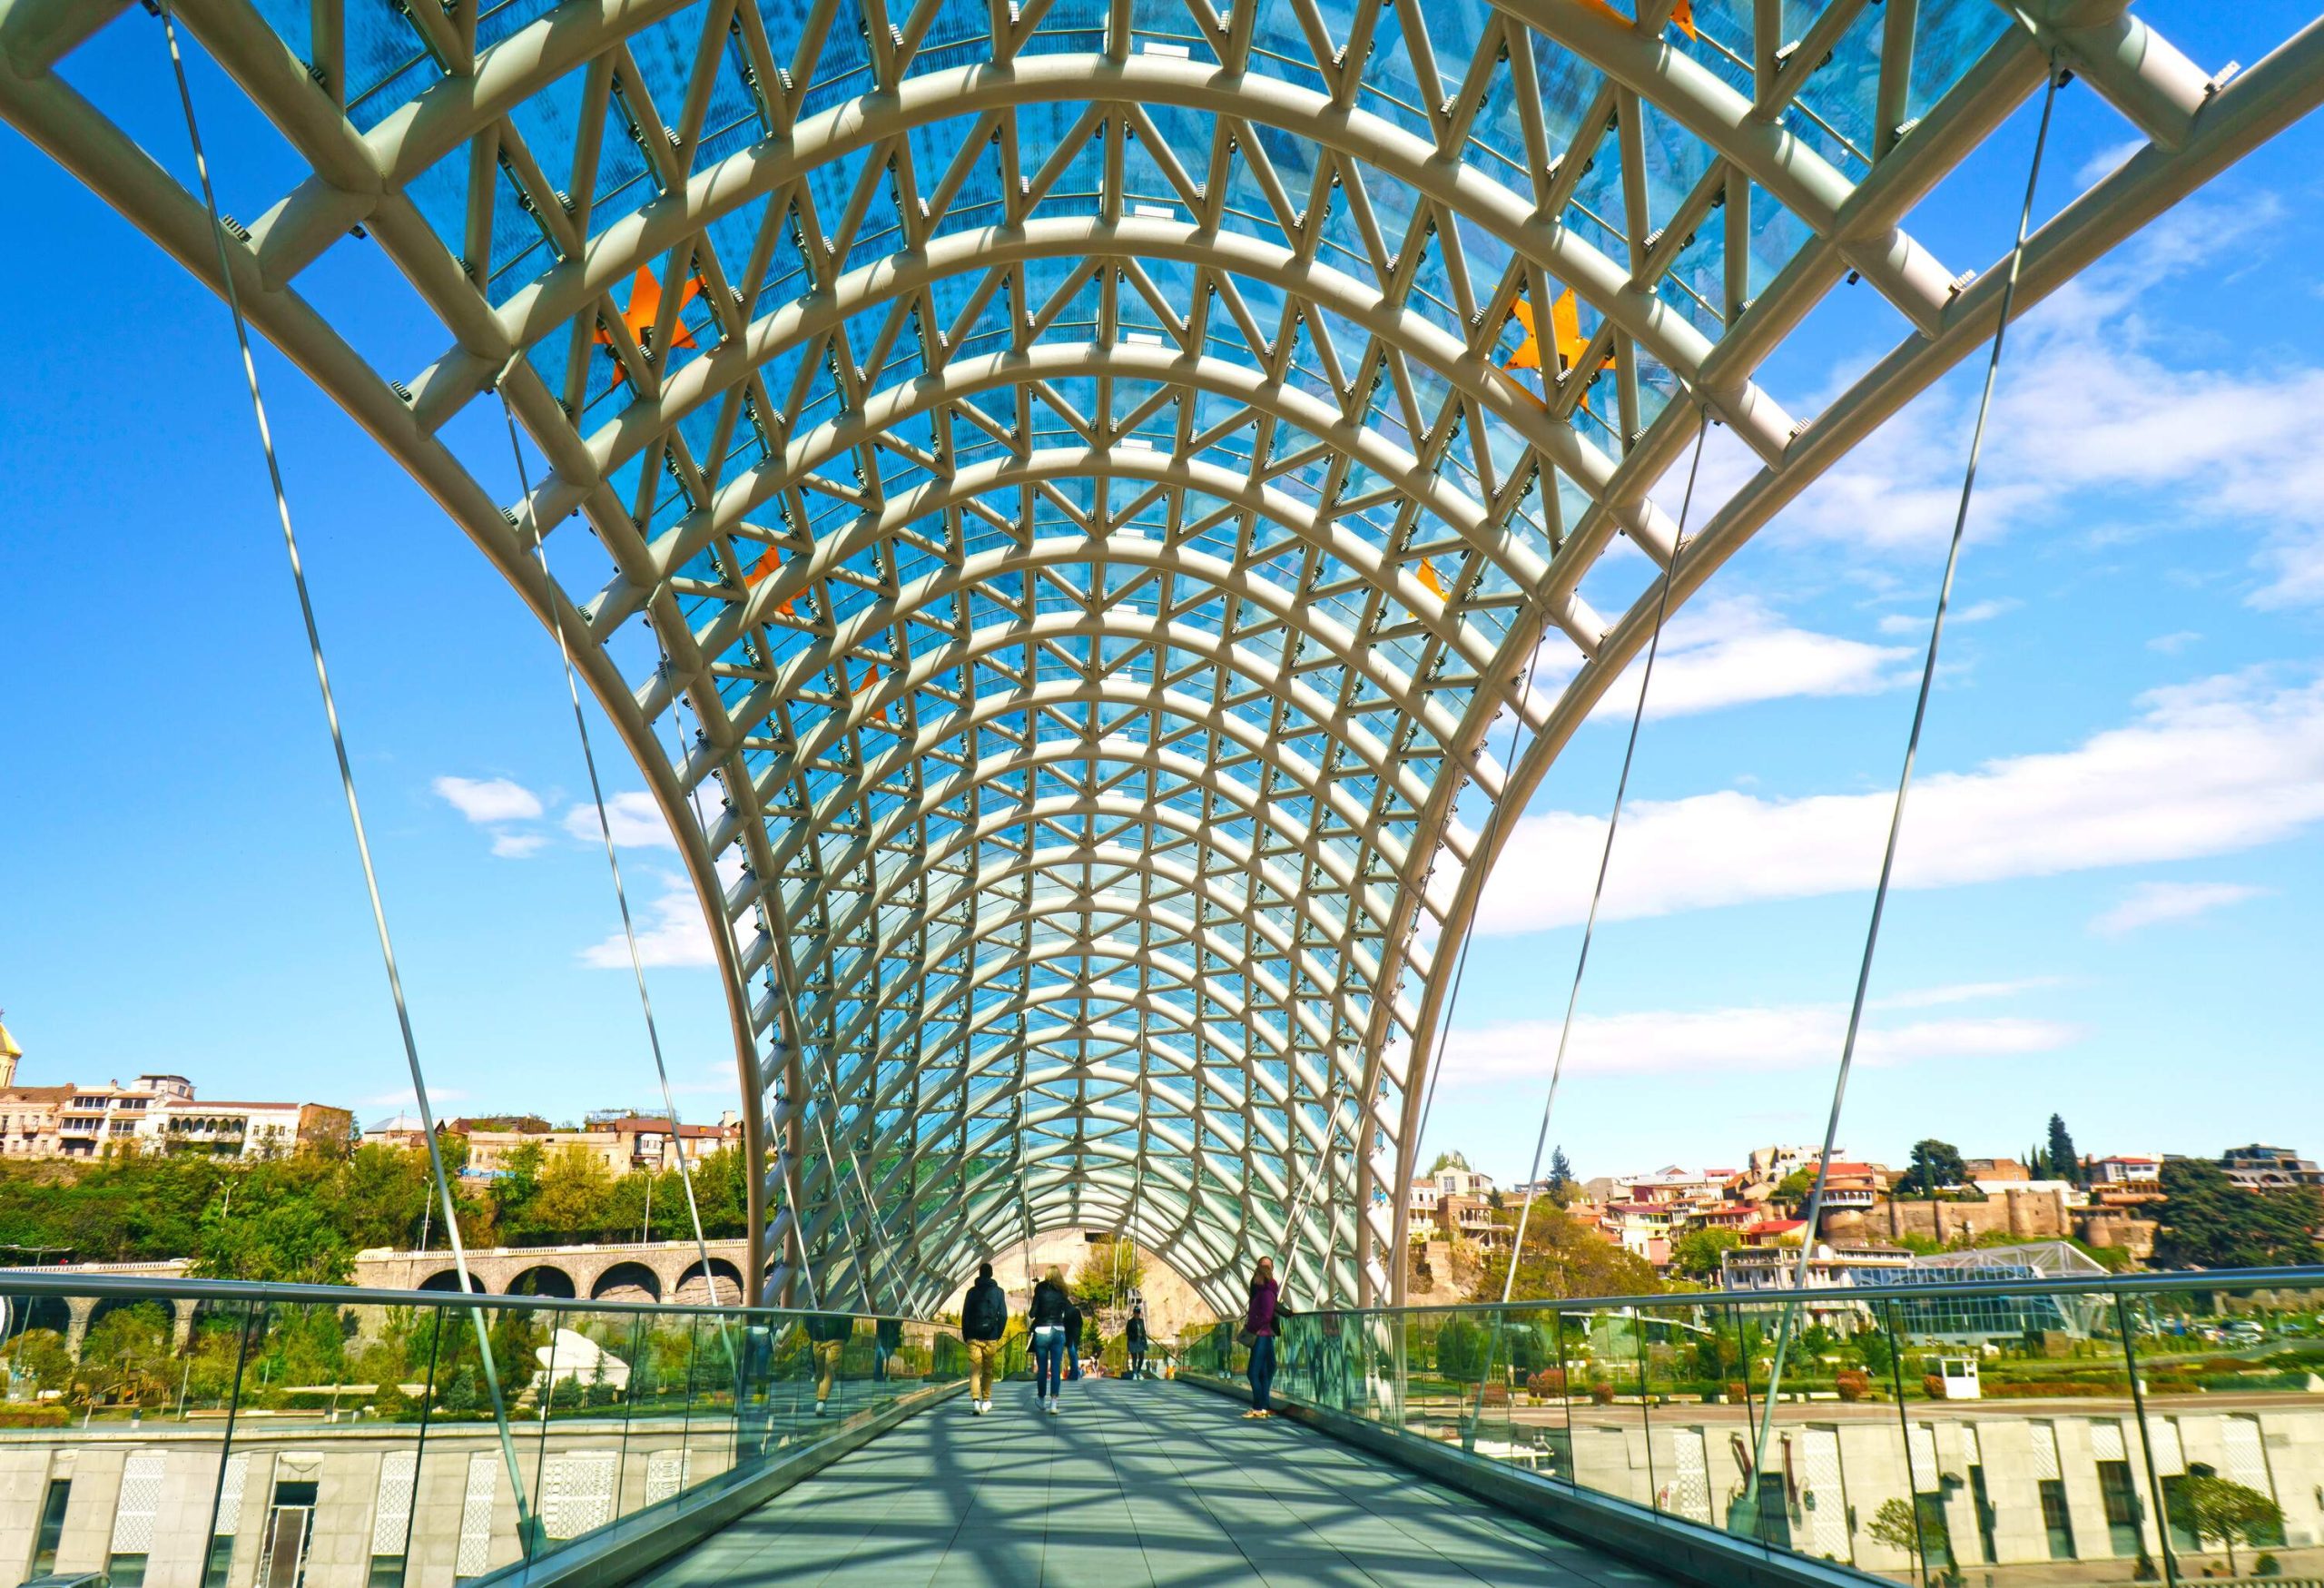 A modern and distinctive pedestrian bridge of steel and glass spans over the river, showcasing a unique and contemporary design.